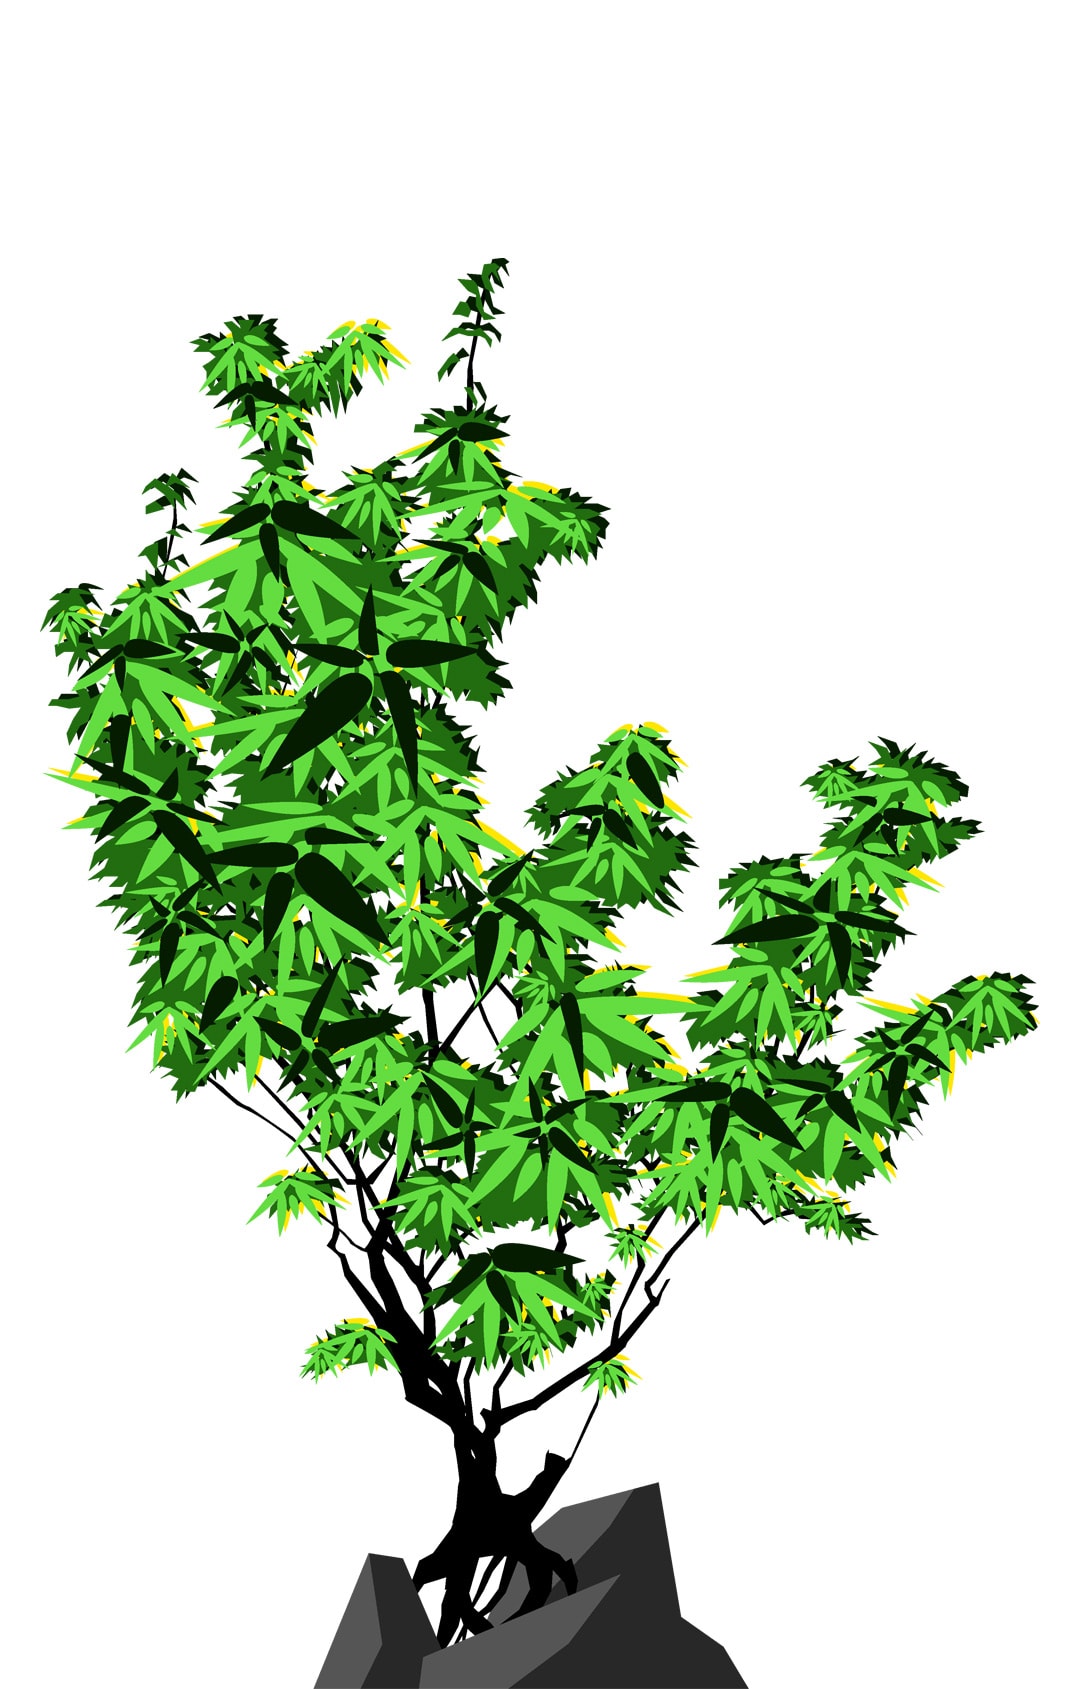 Green Tree 1 vector art by AmourBliss